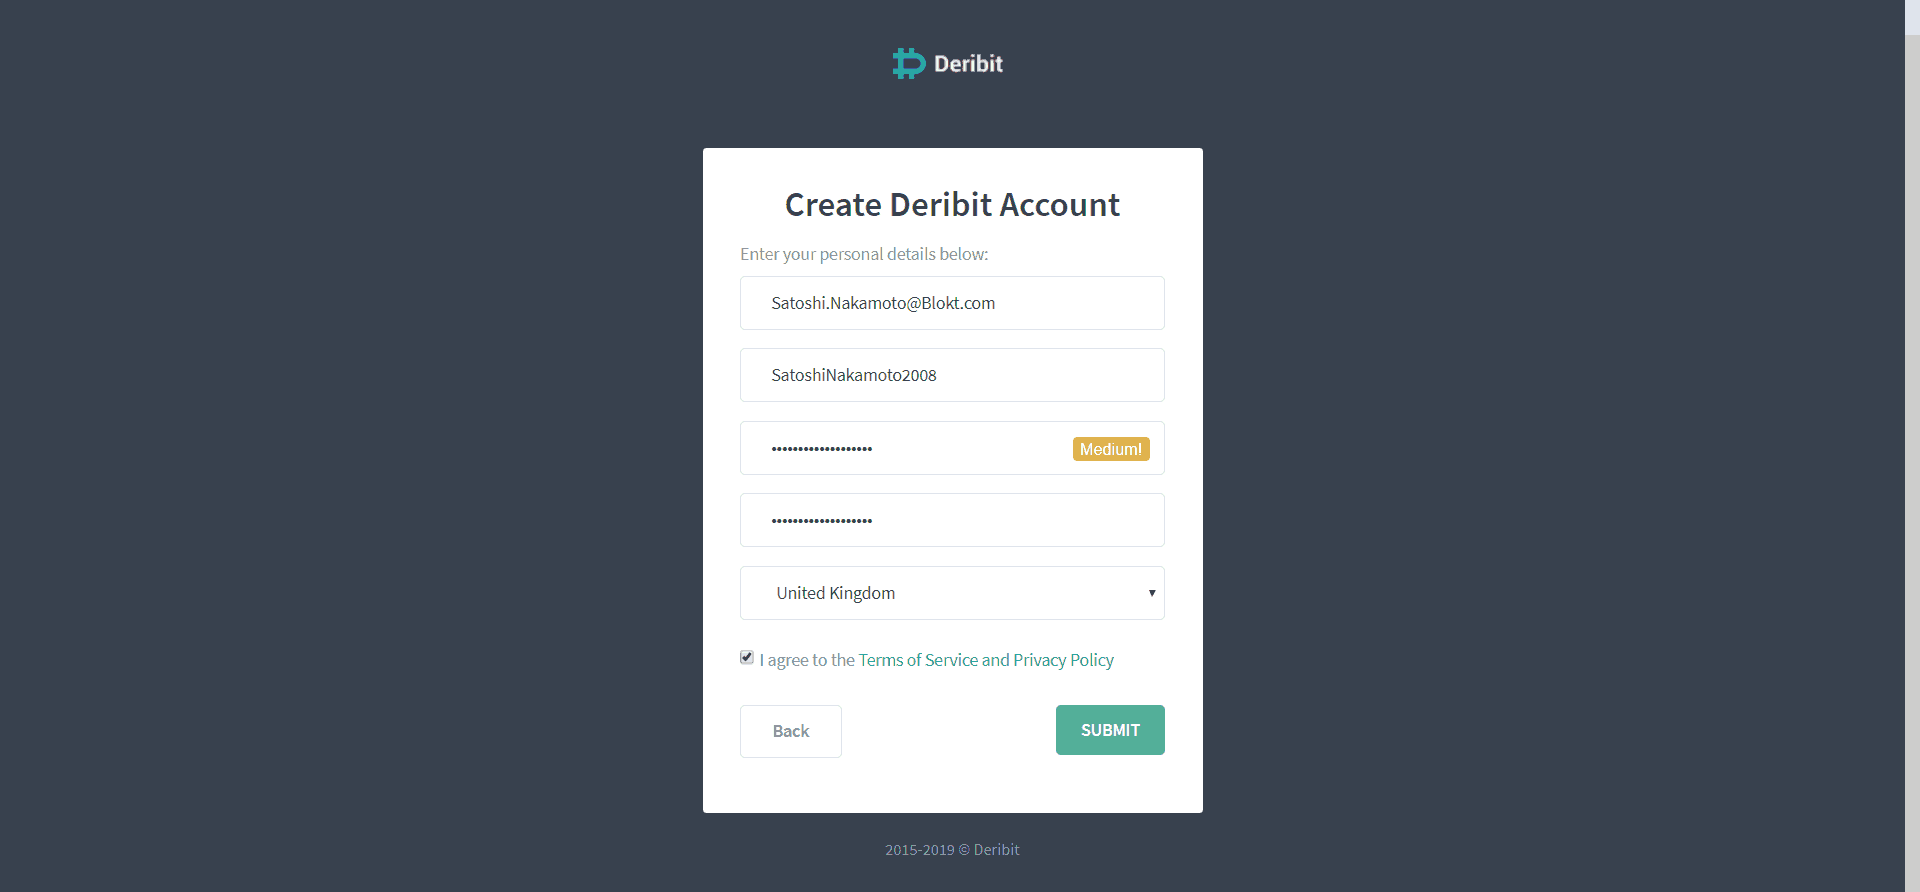 Creating an account with Deribit is quick and easy. 